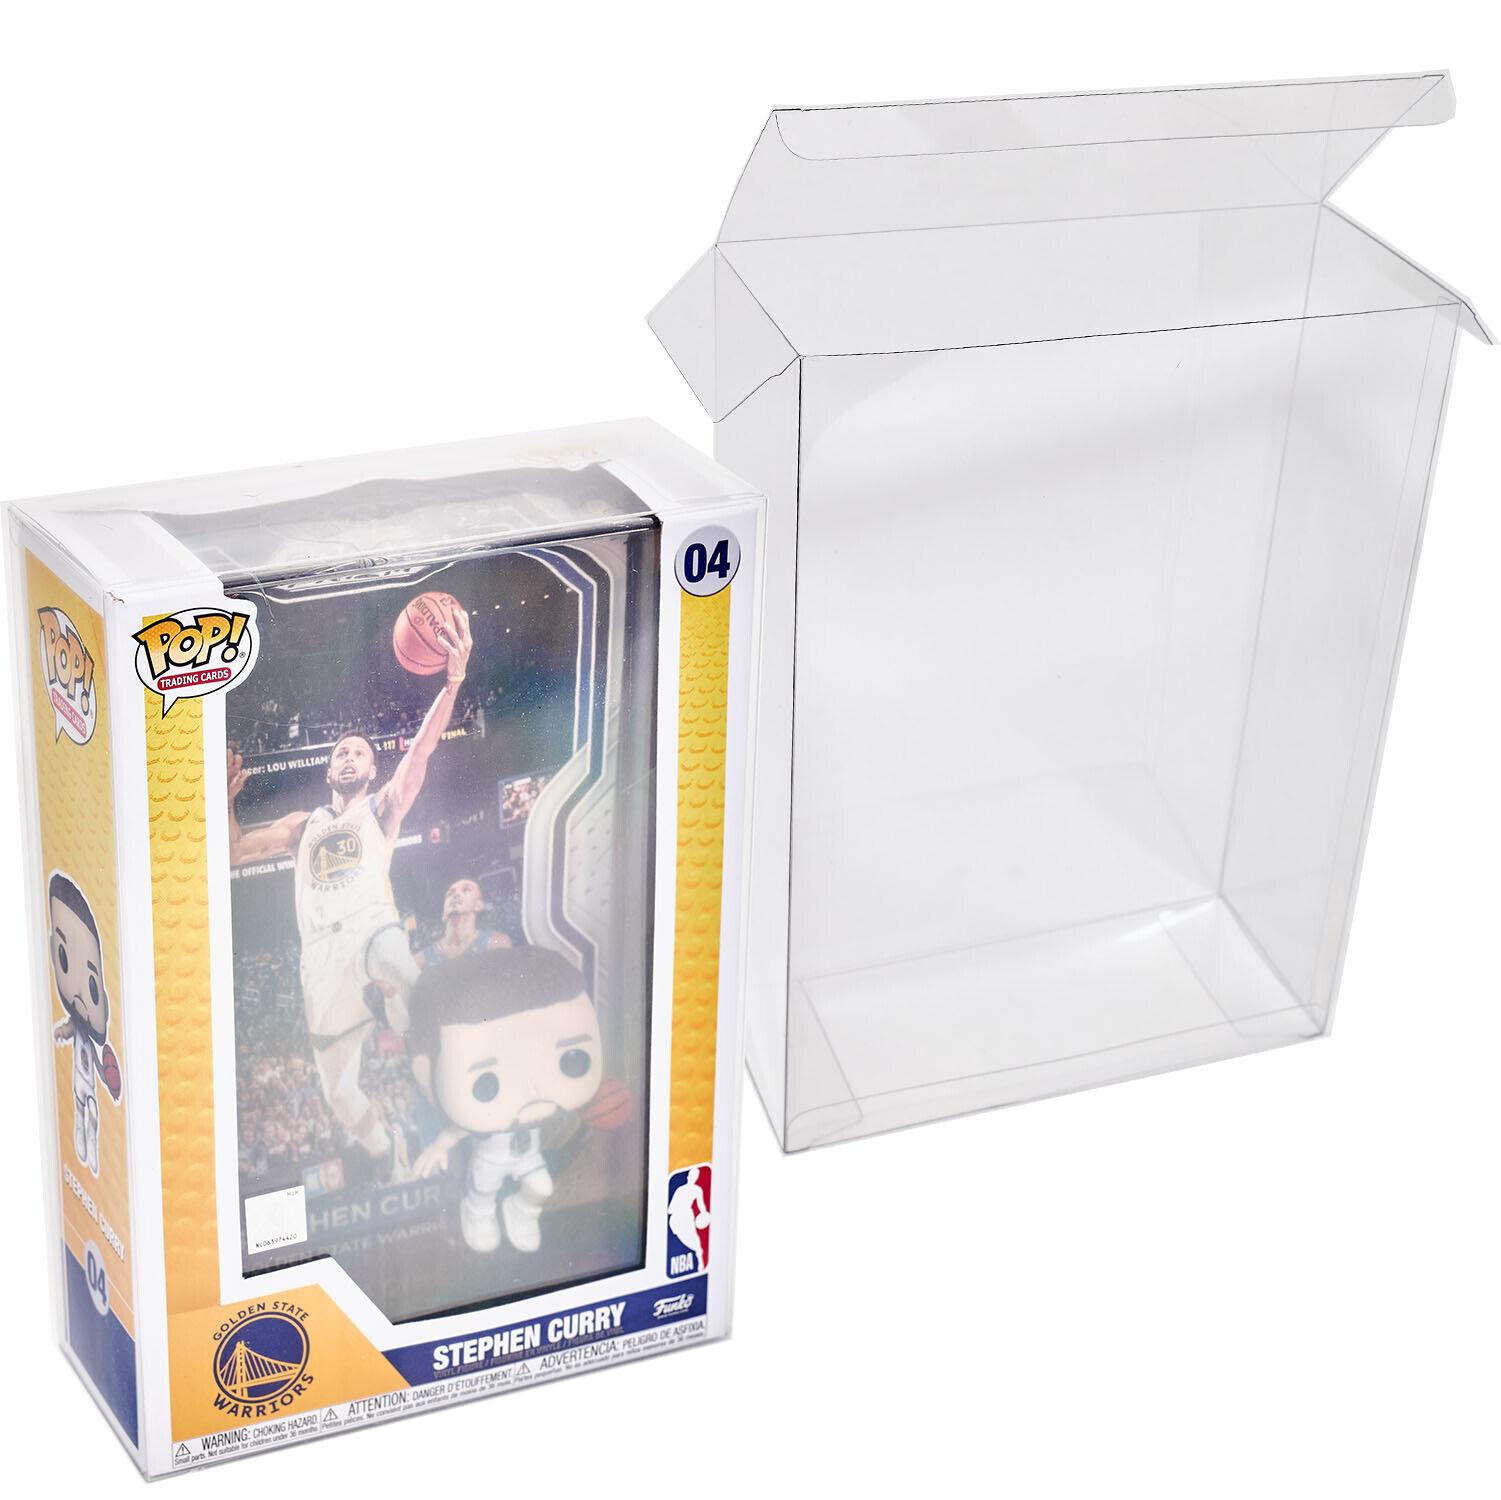 Funko Pop Trading Card Protector Case for Pop Trading Card Boxes